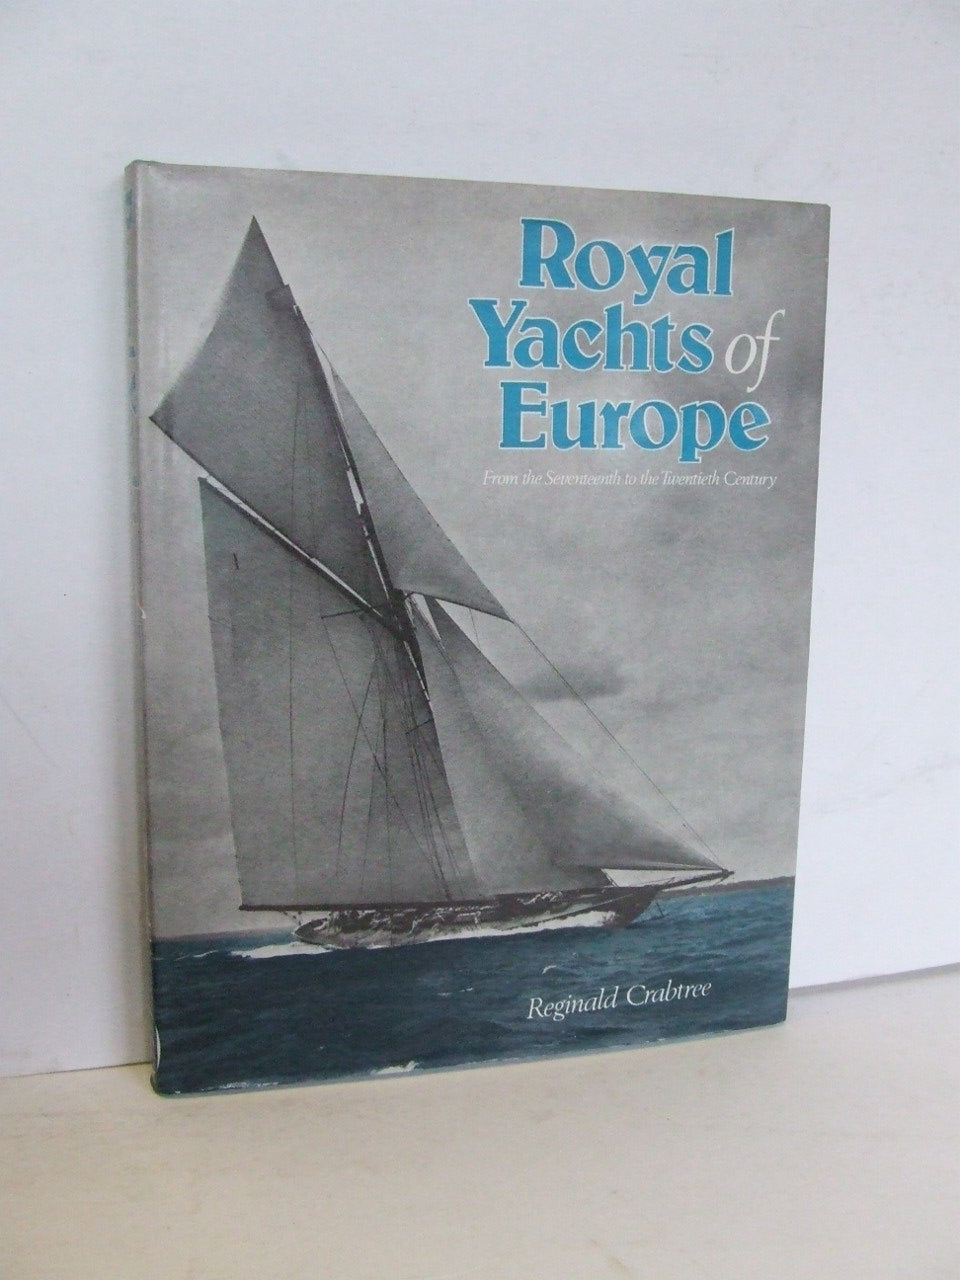 Royal Yachts of Europe from the 17th to the 20th centuries